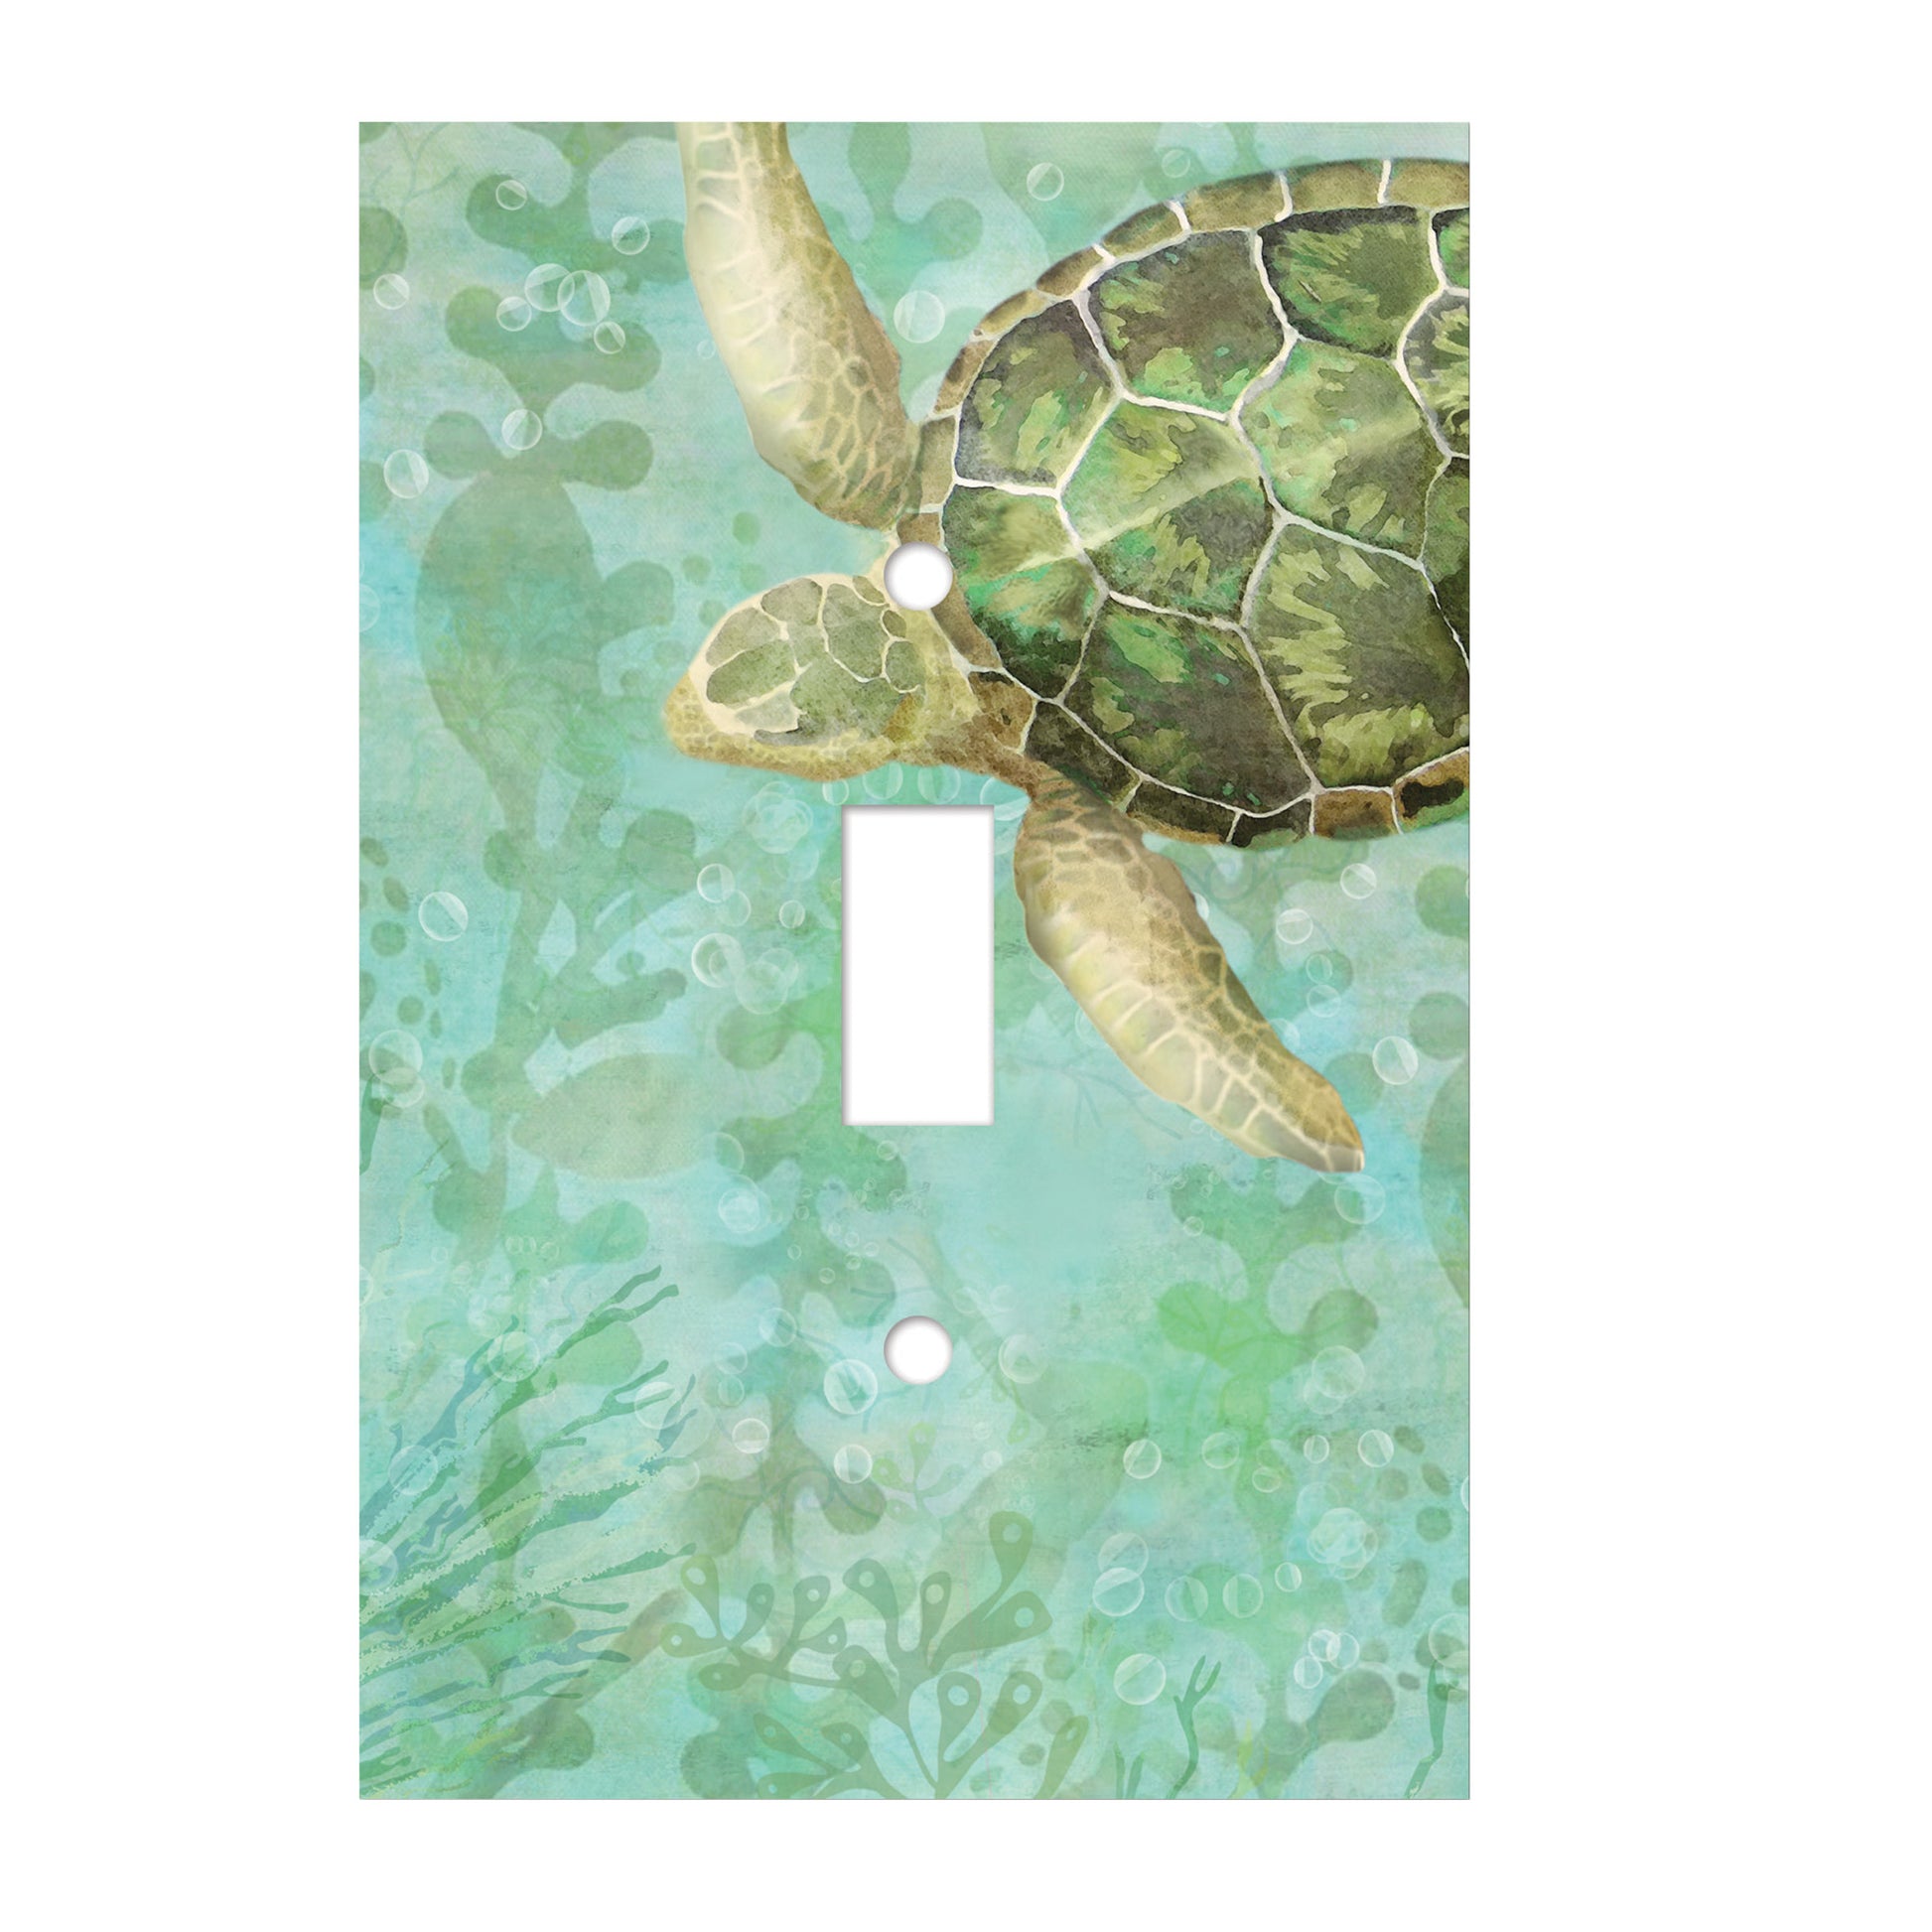 ceramic green single toggle switch plate featuring seaweed patterns and a green sea turtle swimming in from the top right corner.